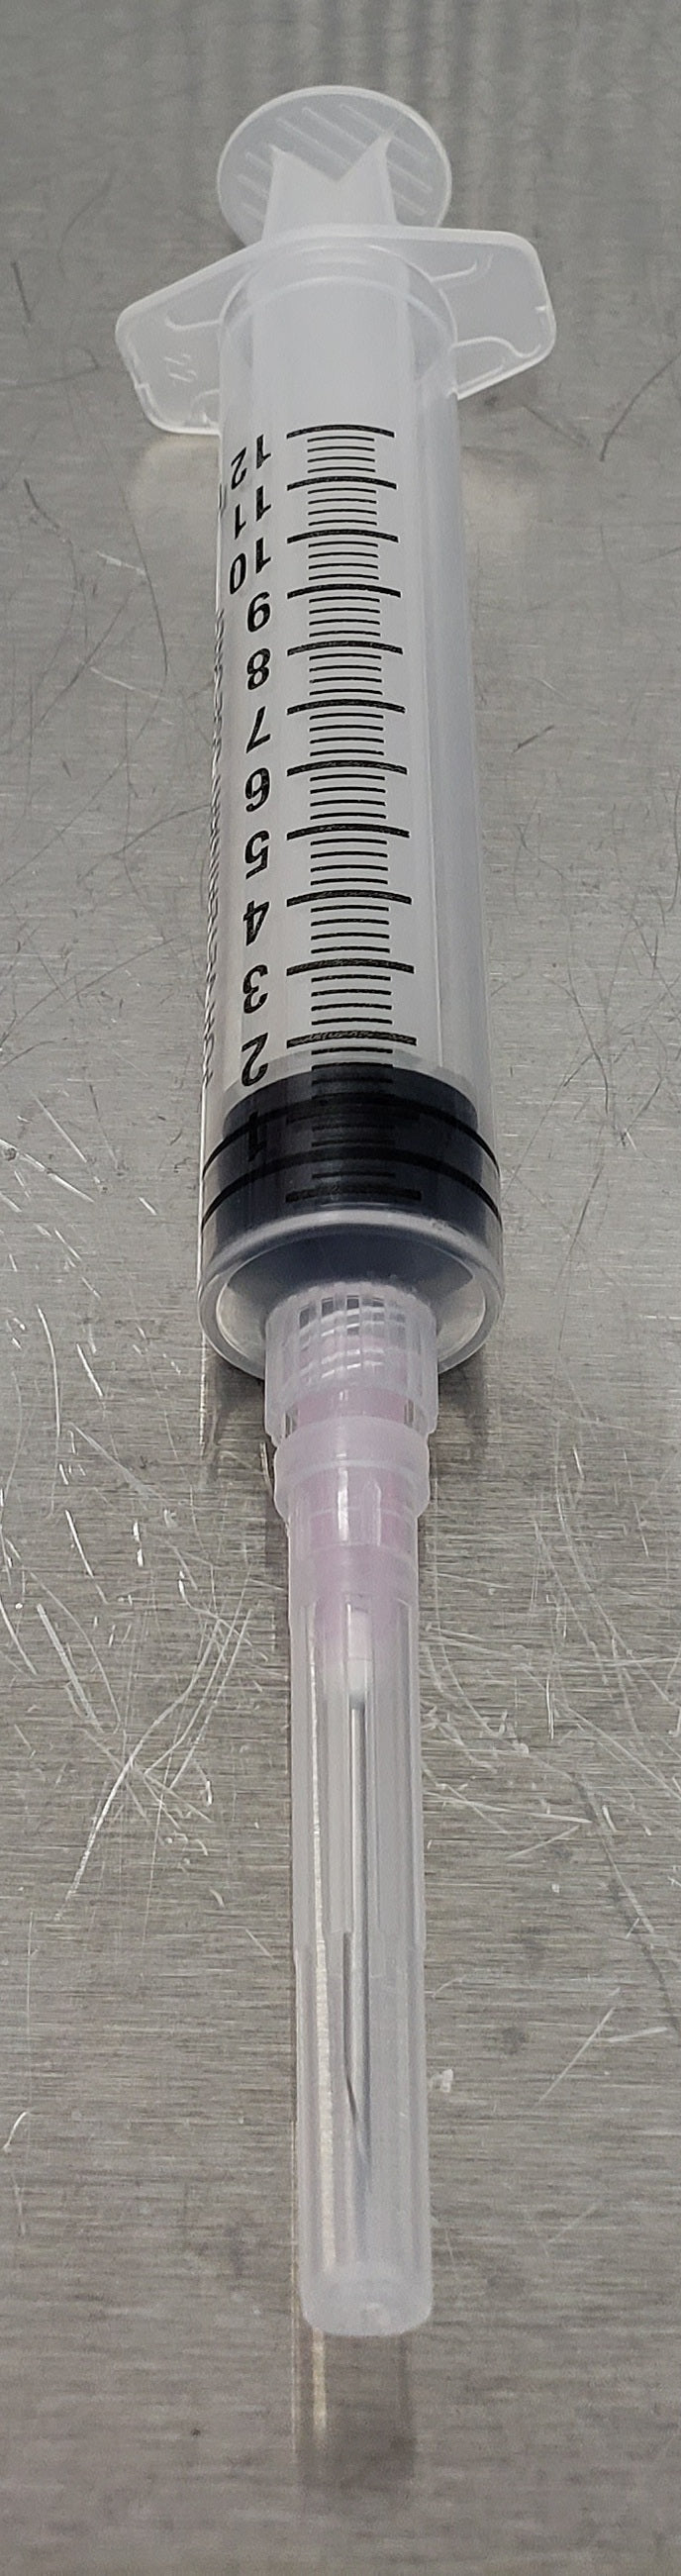 Sterile Disposable Syringe with Needle (12 cc, Luer Lock, Sterile, 1 inch, 18 gague needle)